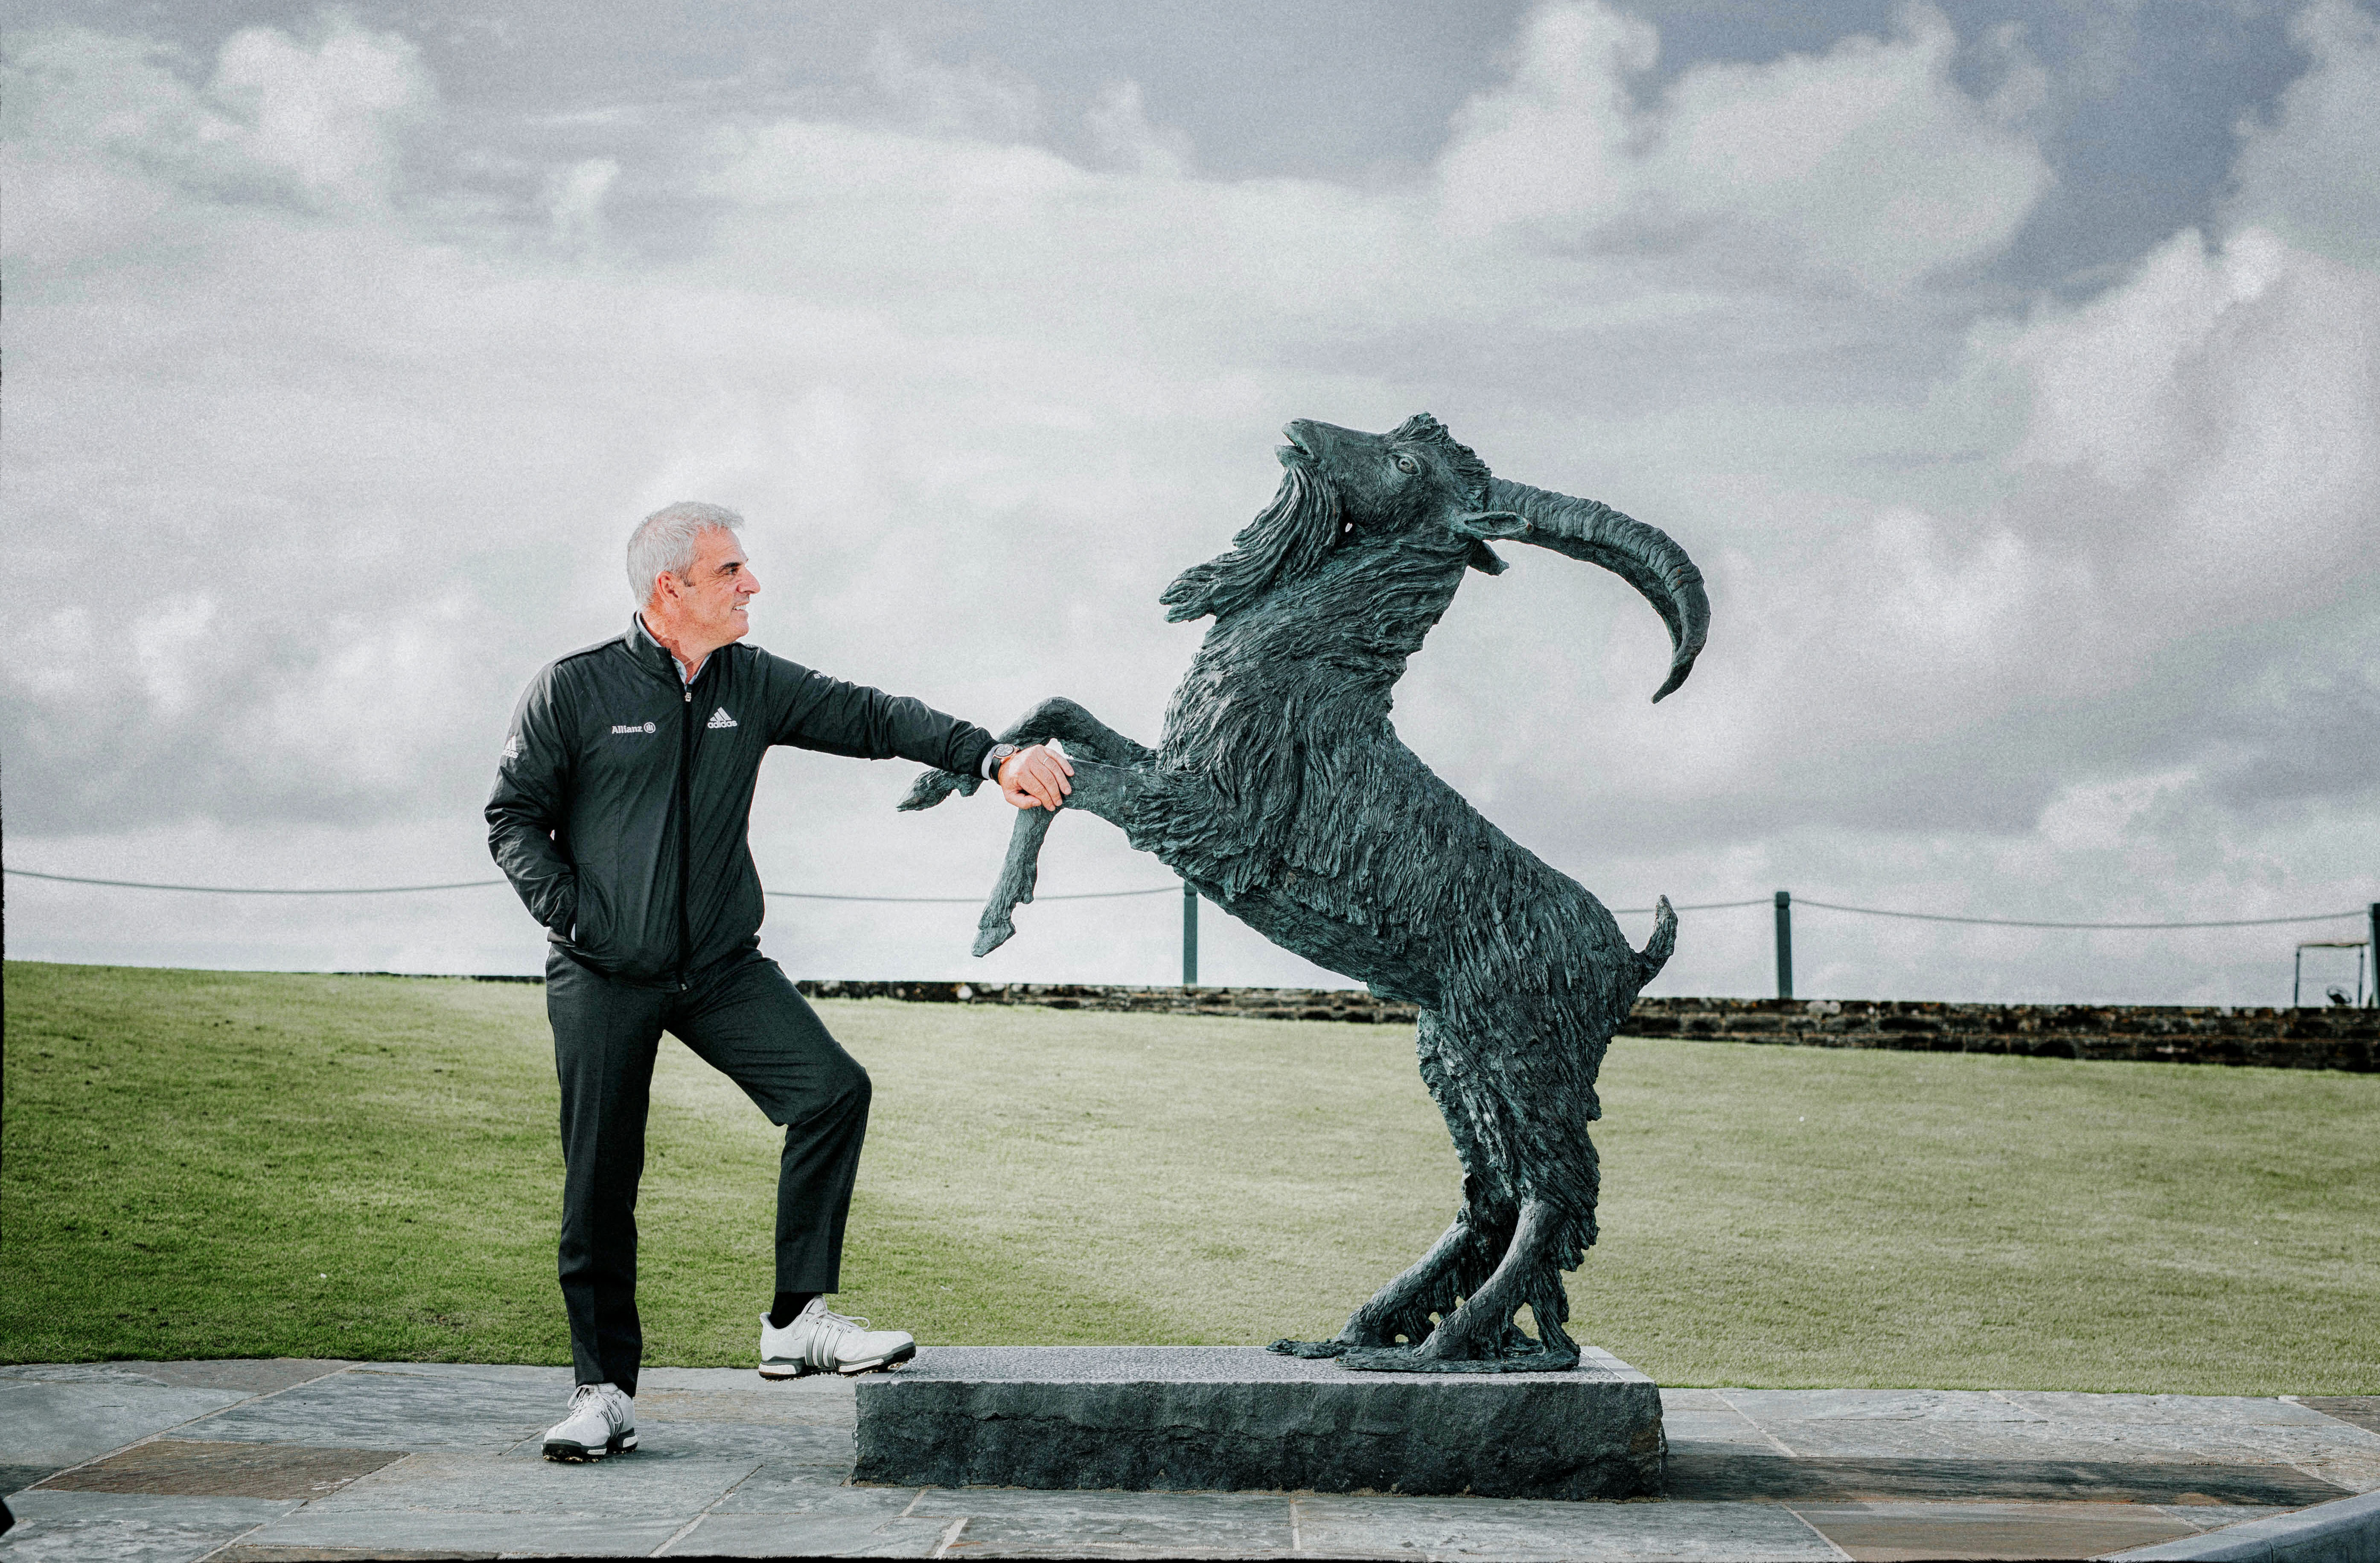 Paul McGinley with The Rampant Goat bronze at Lahinch Golf Club which was unveiled as part of the club's 125 year celebrations last year. © Lahinch Golf Club